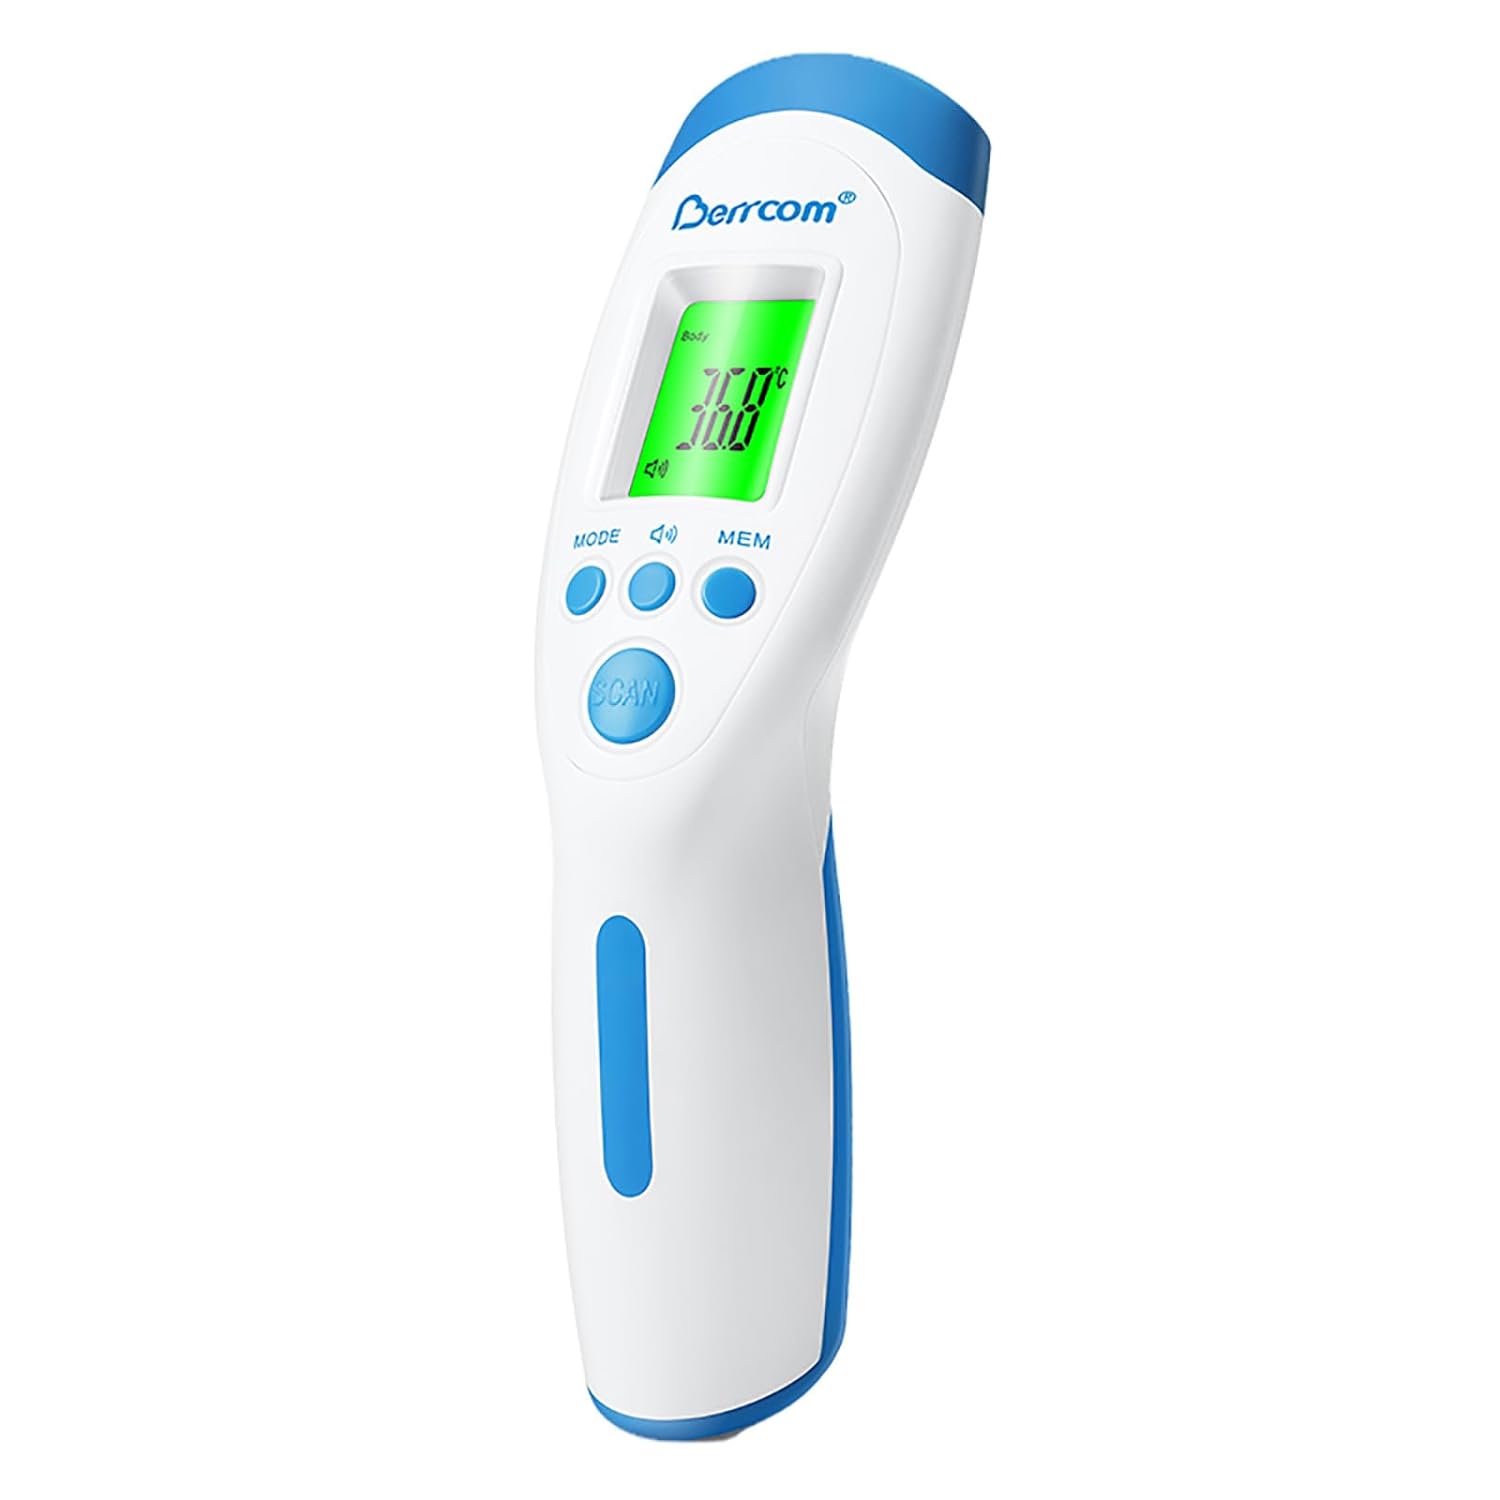 Berrcom Non Contact Infrared Thermometer Digital Forehead Thermometer with Fever Alert and LCD Display 3 in 1 Contactless Thermometer Ideal for Adults and Kids